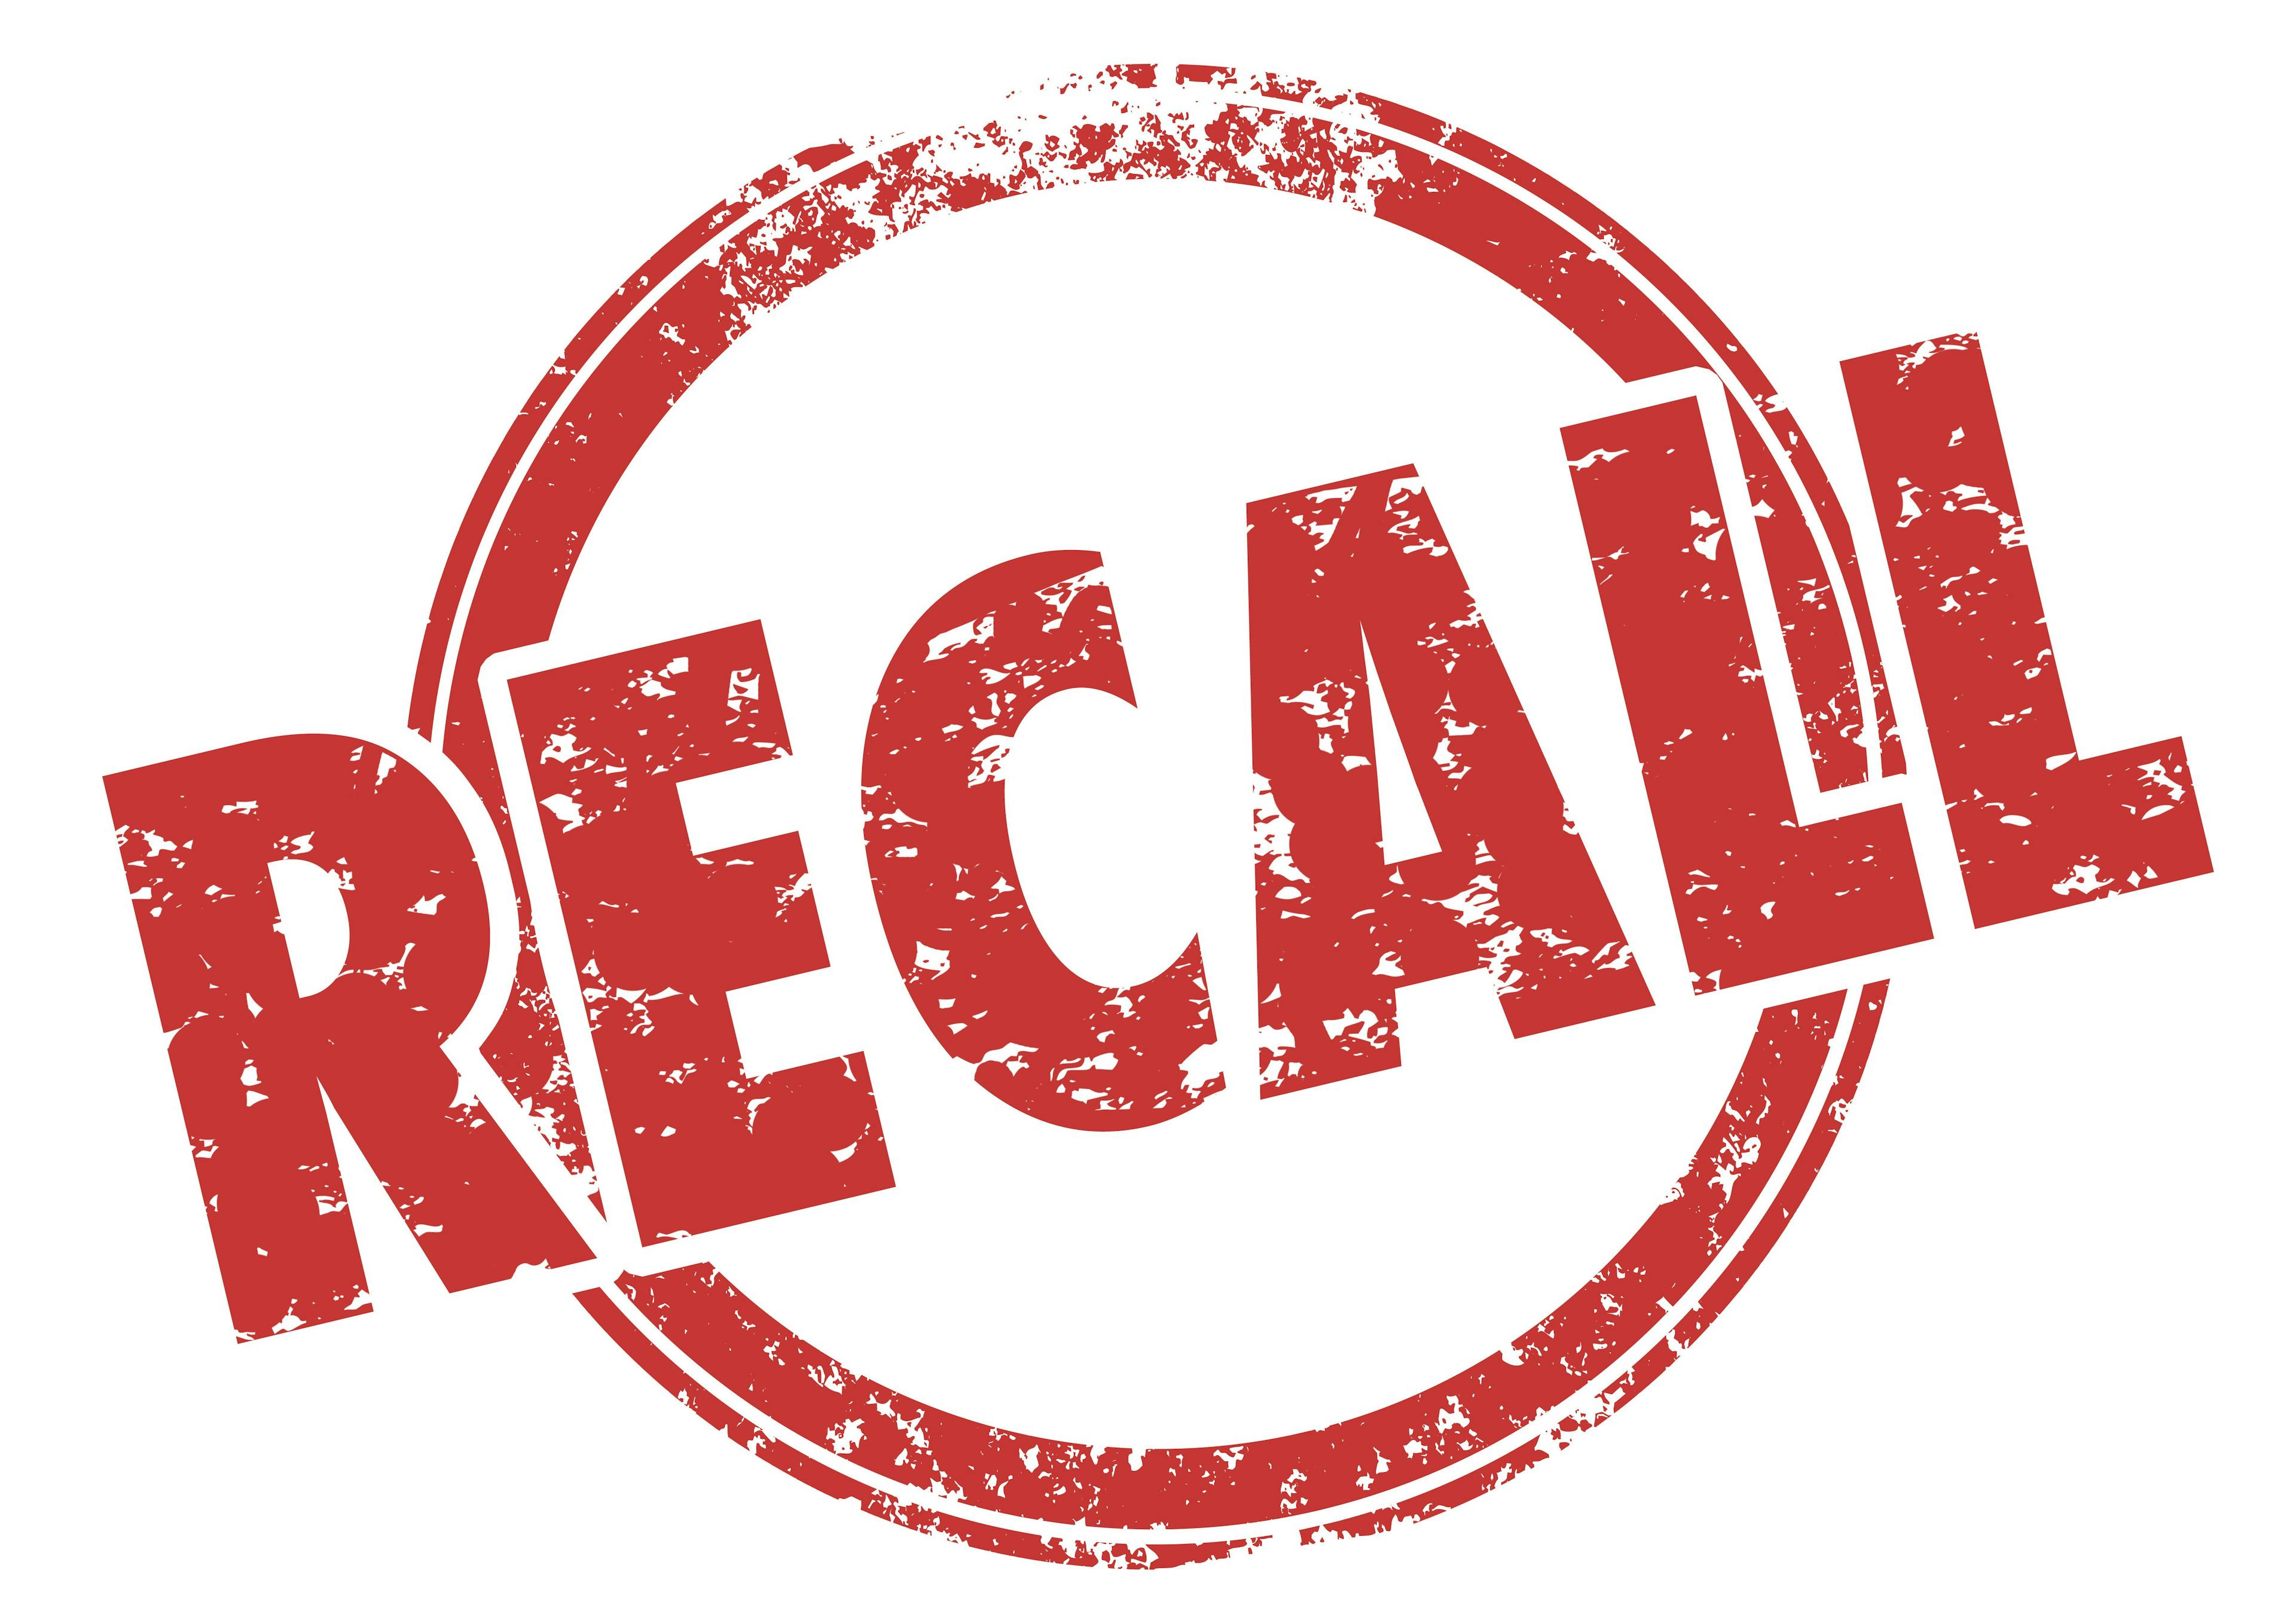 Bayer Announces Voluntary Recall of OTC Antifungal Products